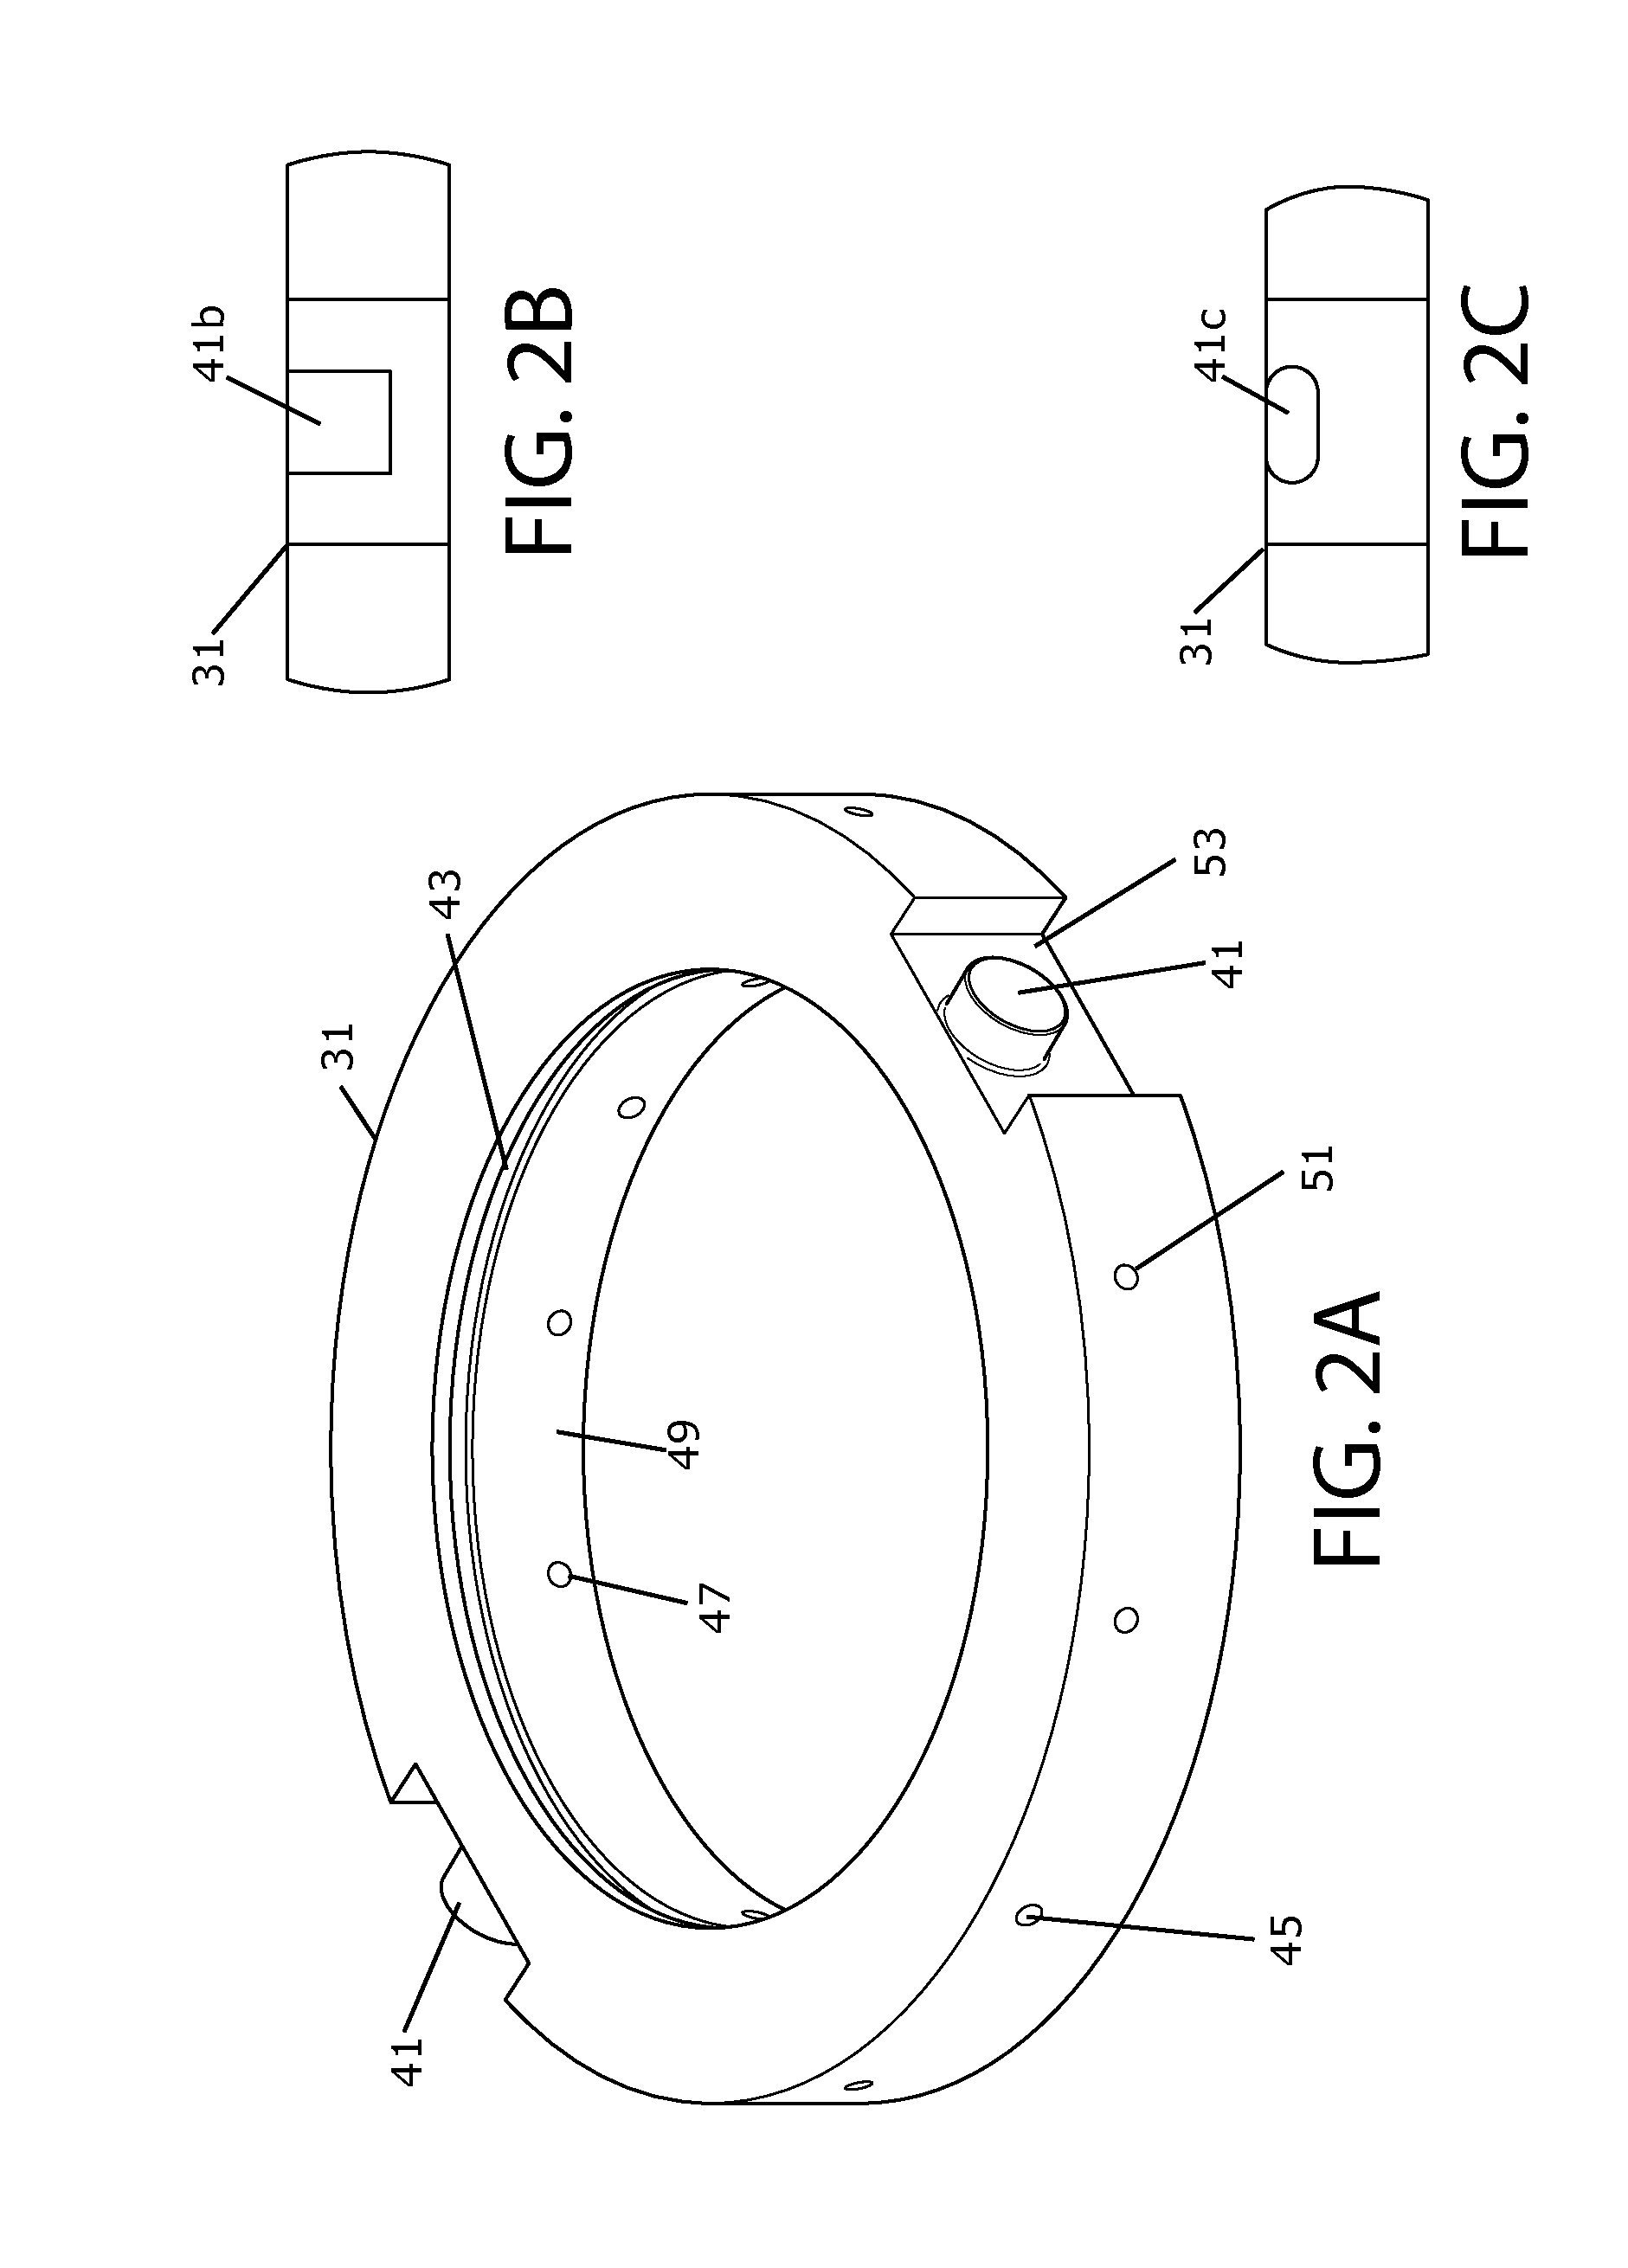 Ventilated transfer cask with lifting feature